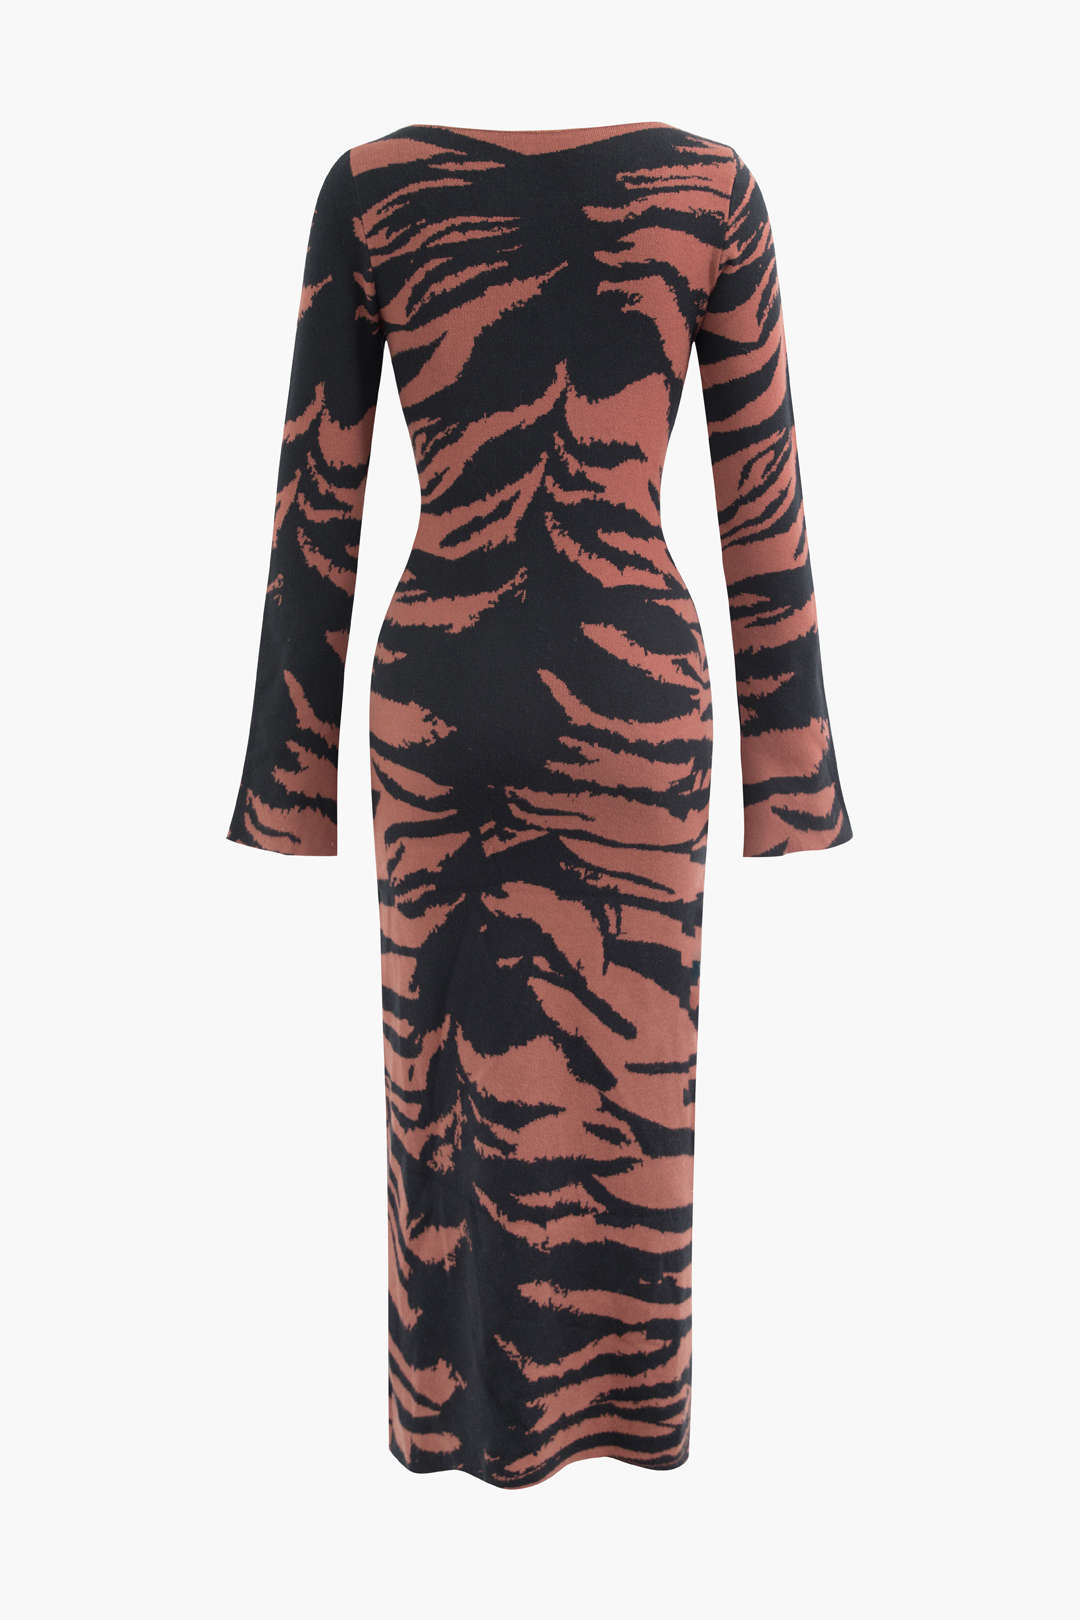 Tiger Print Round Neck Side Cut Out Knit Maxi Dress